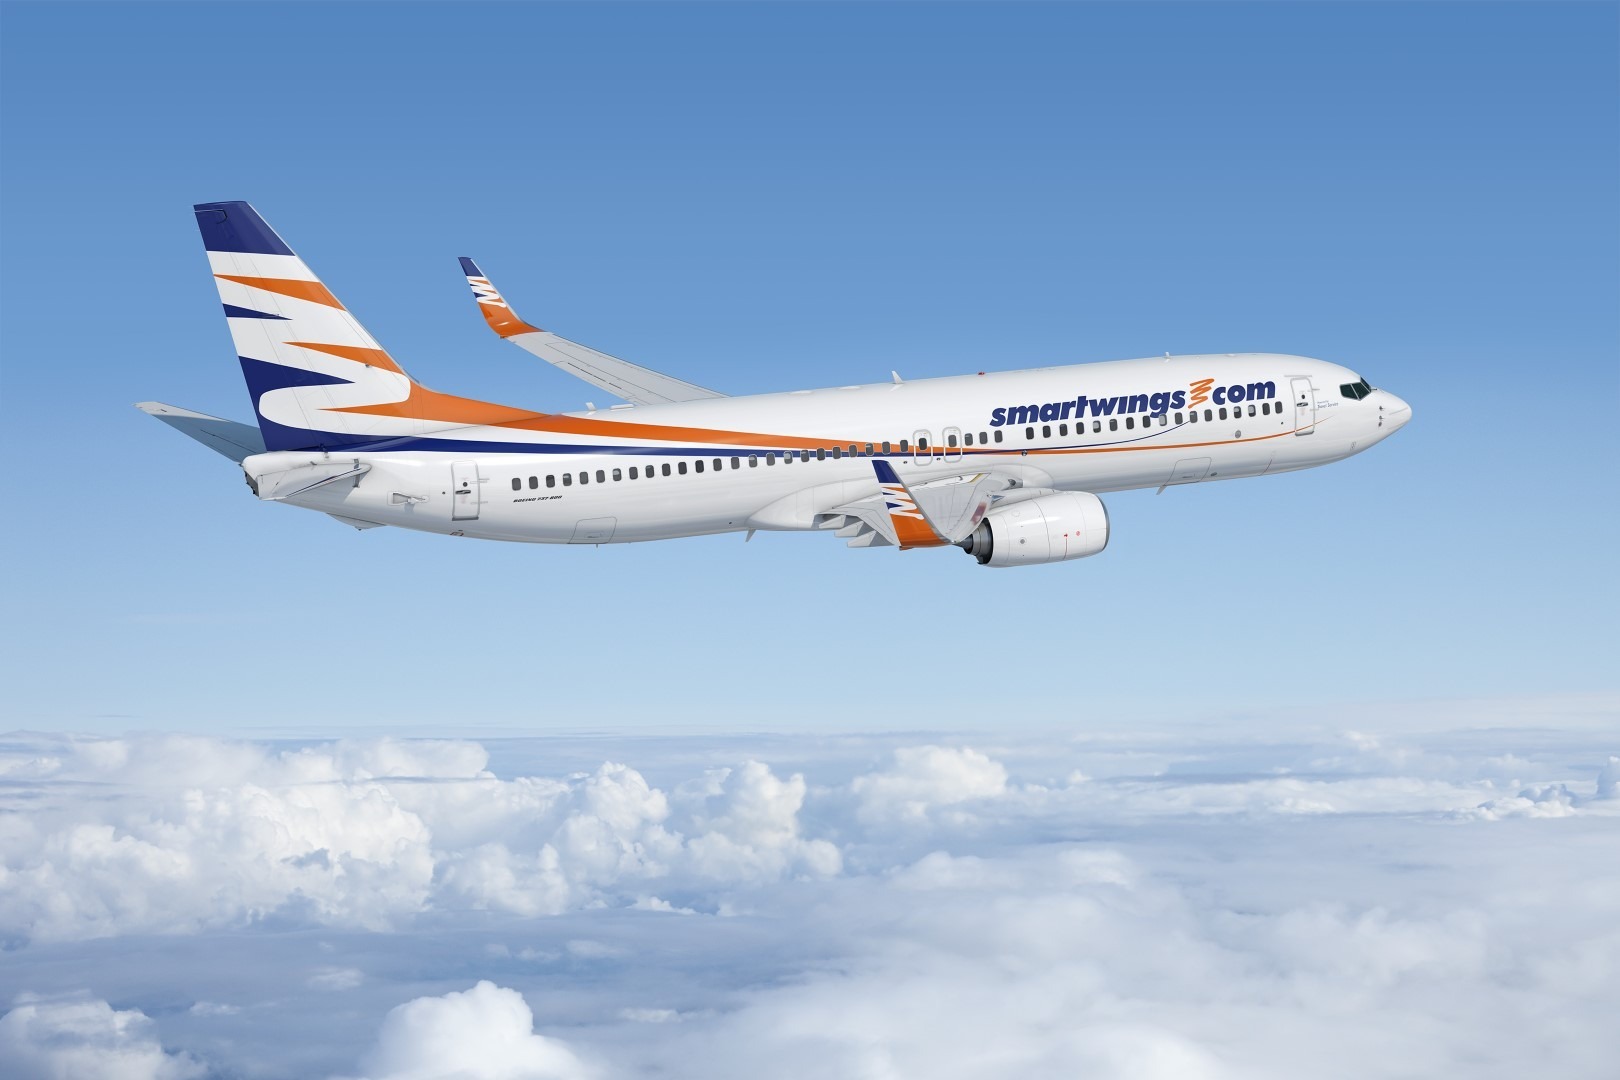 flydubai announces new wet lease agreement with Smartwings